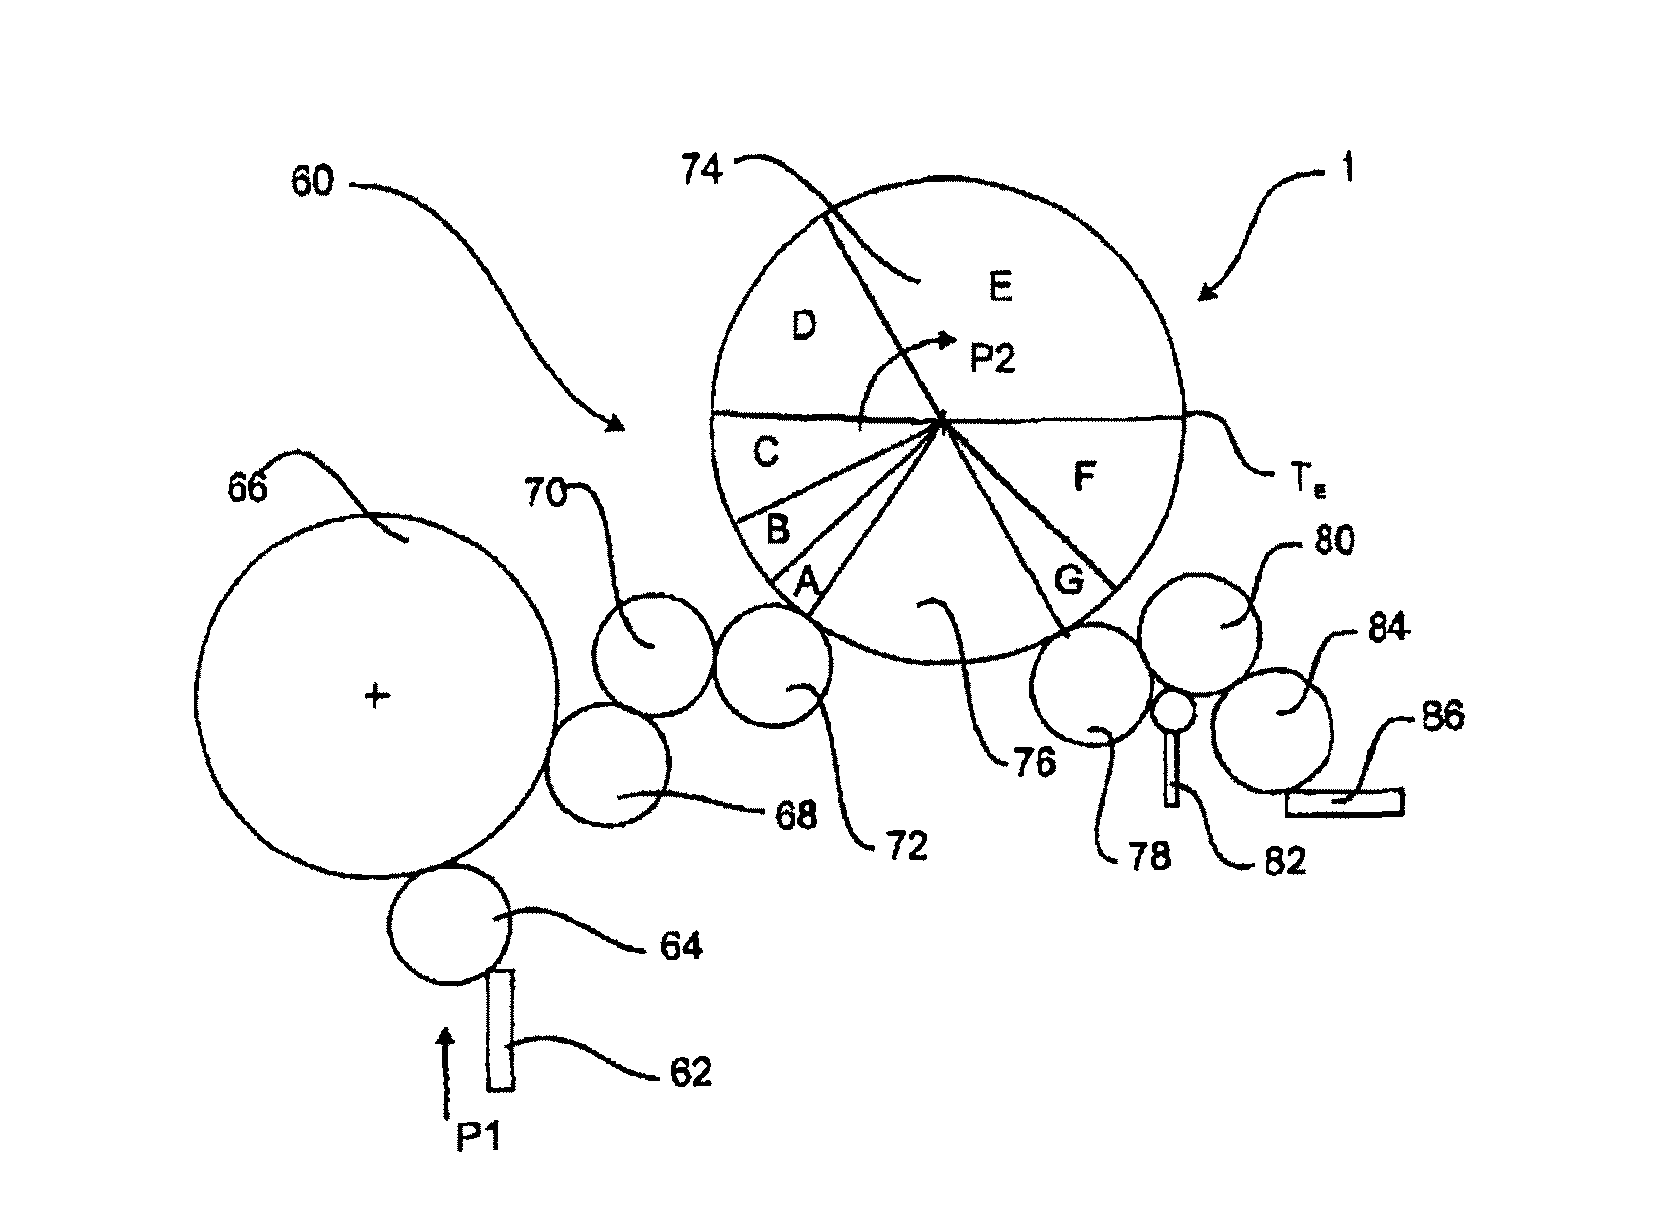 Apparatus for filling containers with multicomponent liquids